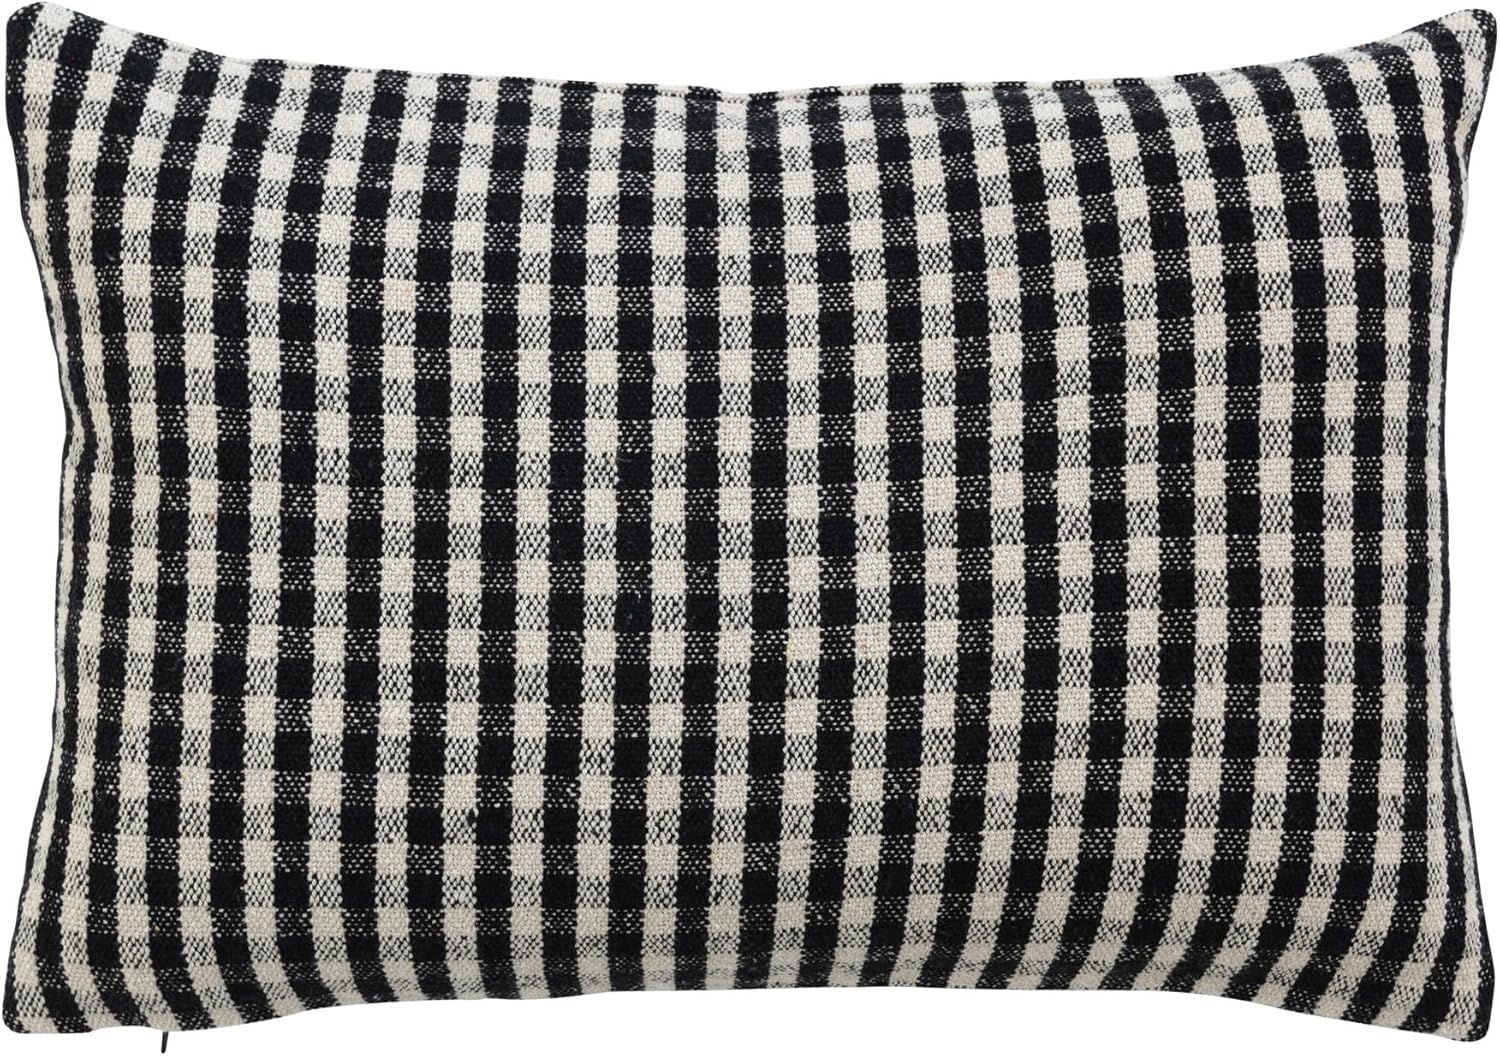 Creative Co-Op Creative Co-Op Woven Recycled Cotton Blend Lumbar Pillow Gingham, Black and White | Amazon (US)